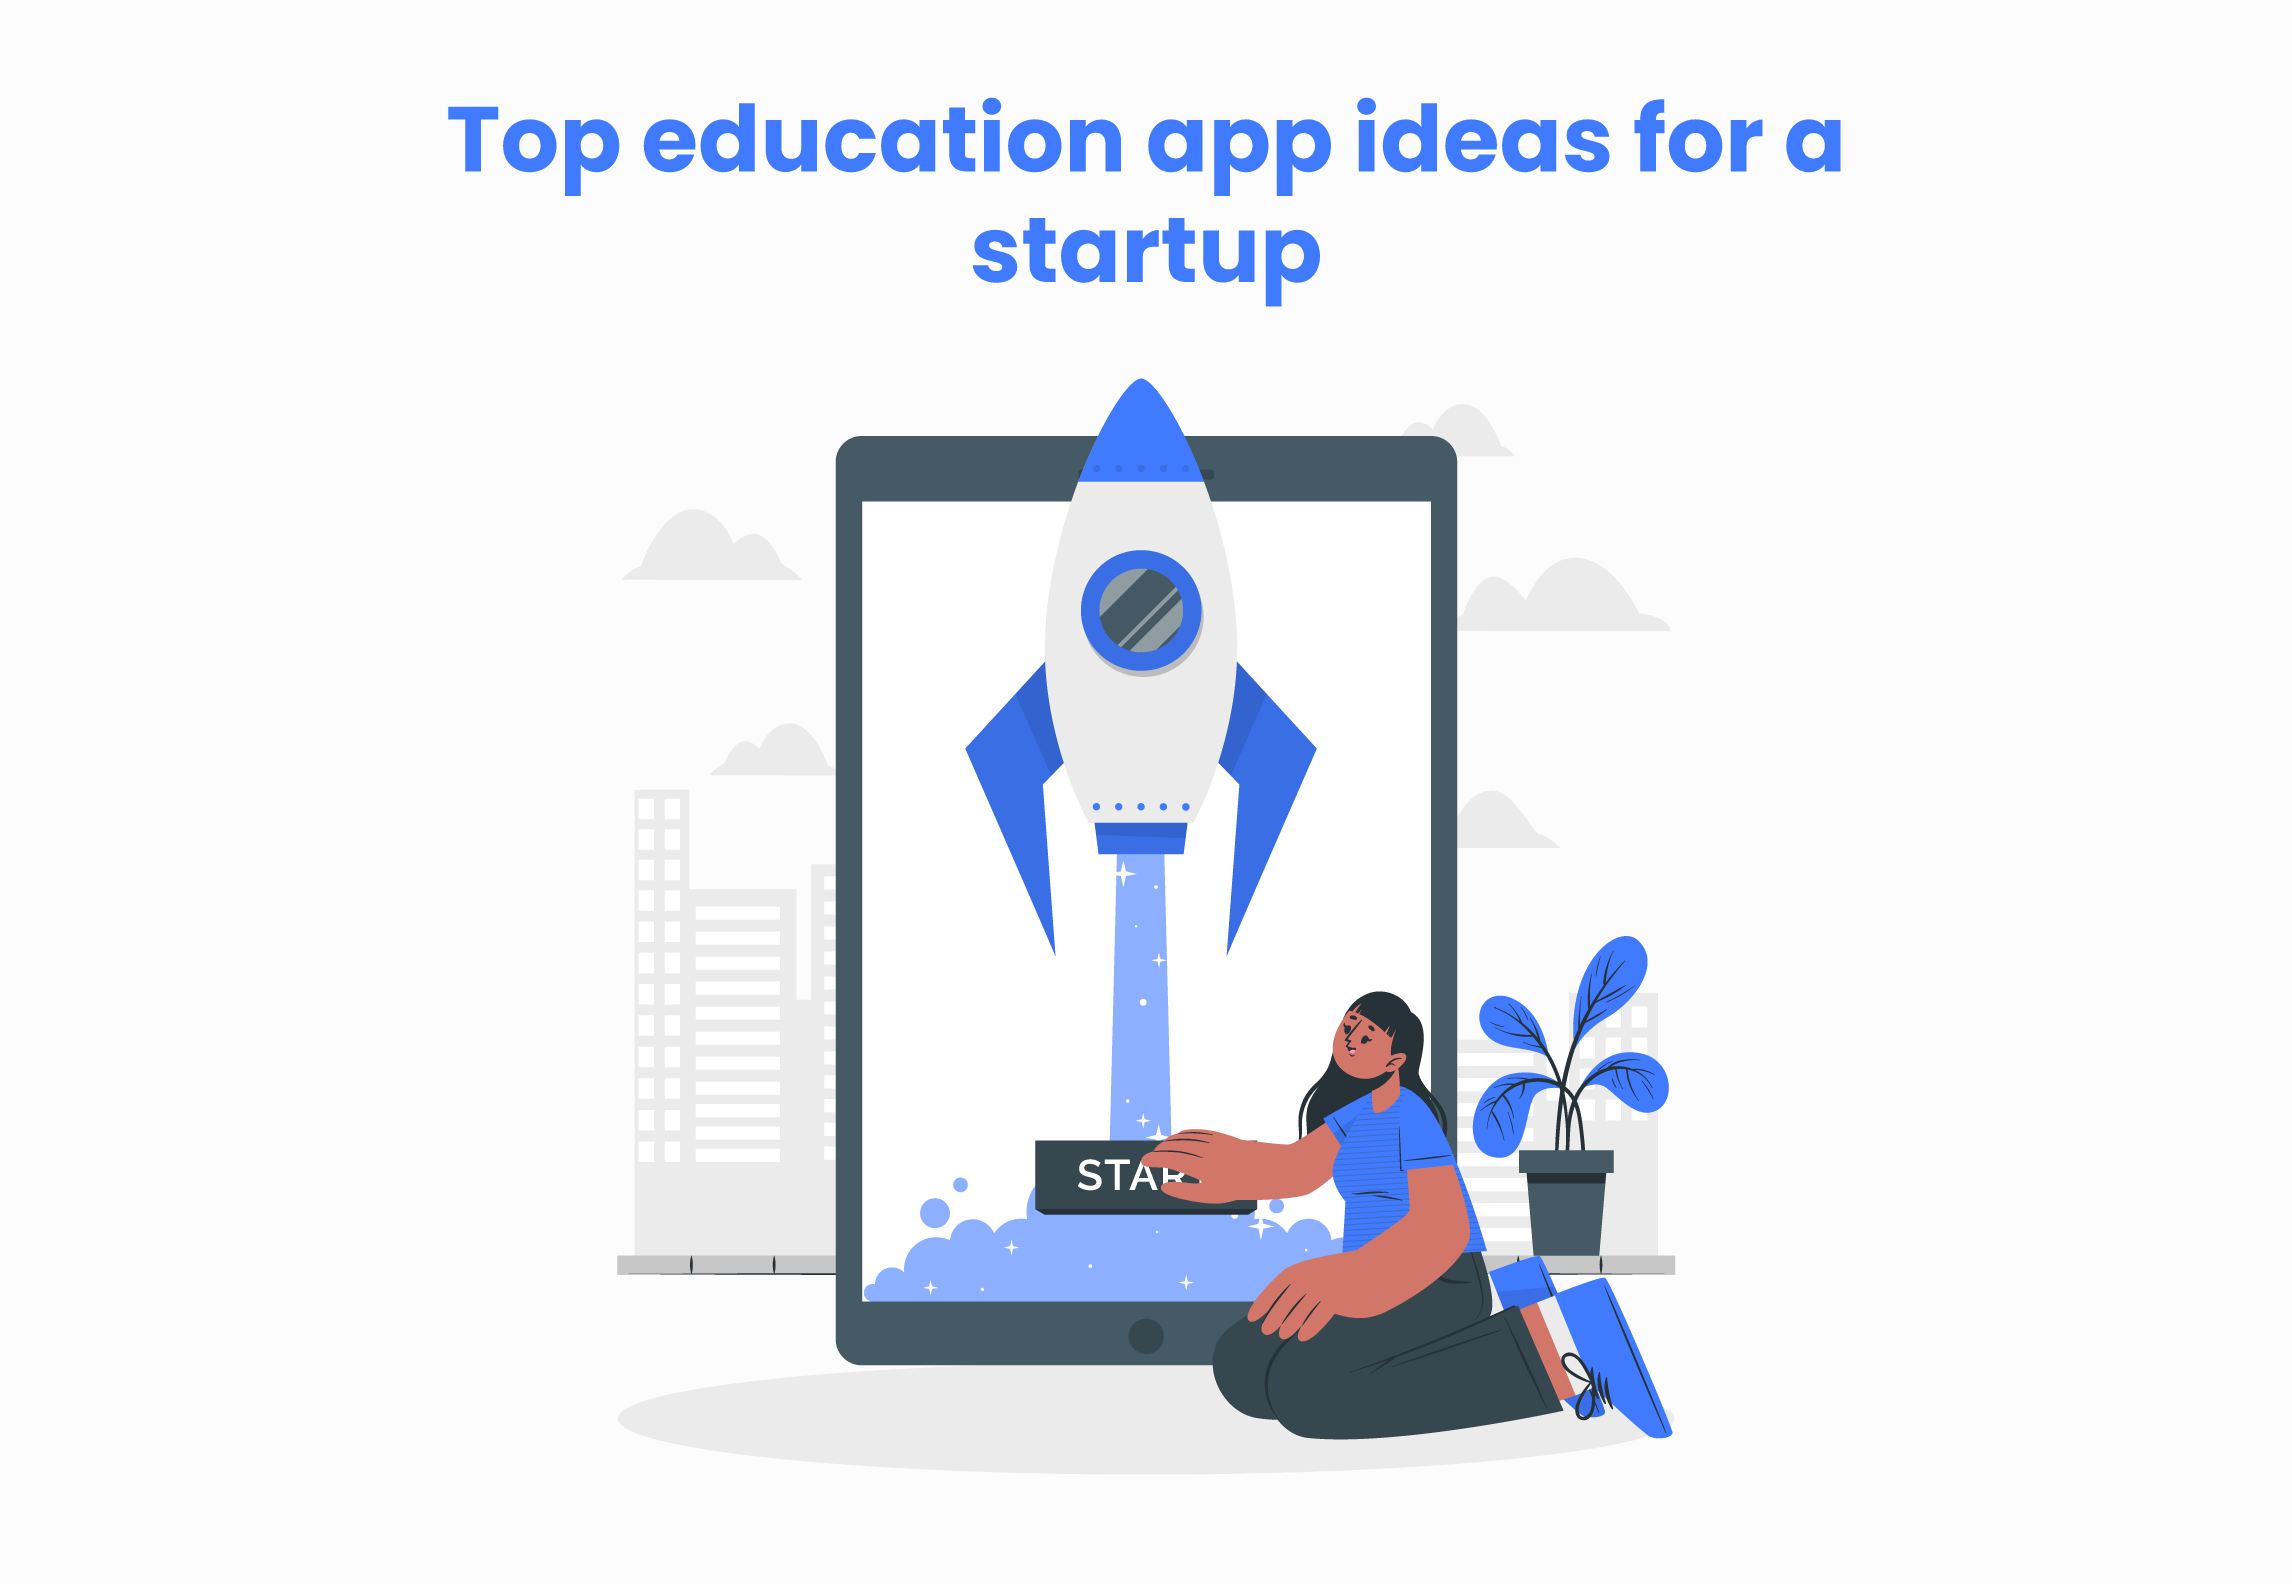 List of Top Education App Ideas for a Startup